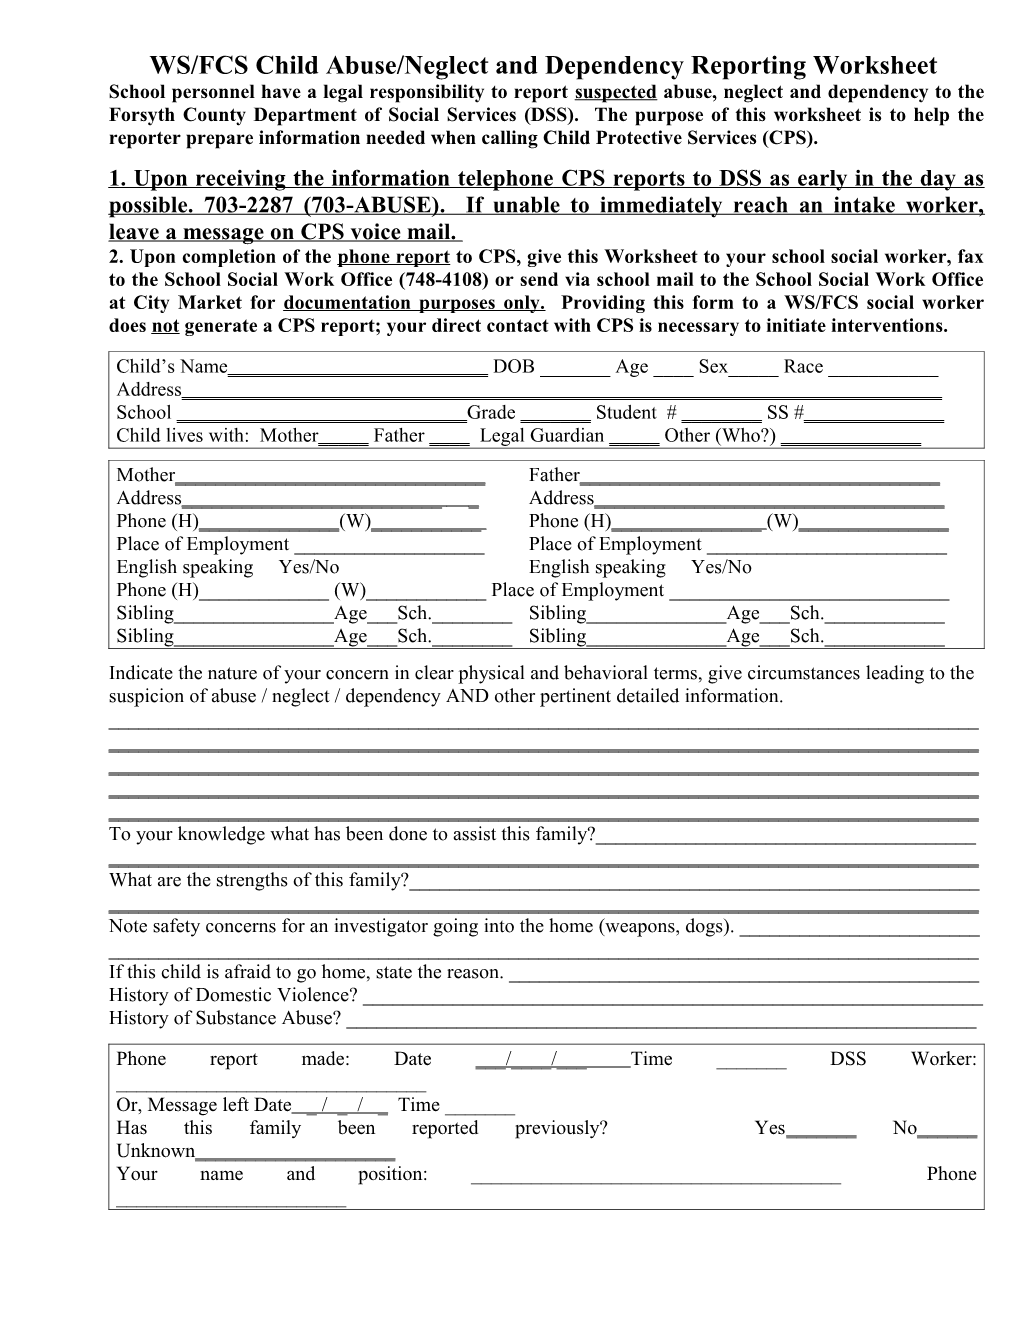 WS/FCS Child Abuse/Neglect and Dependency Reporting Worksheet